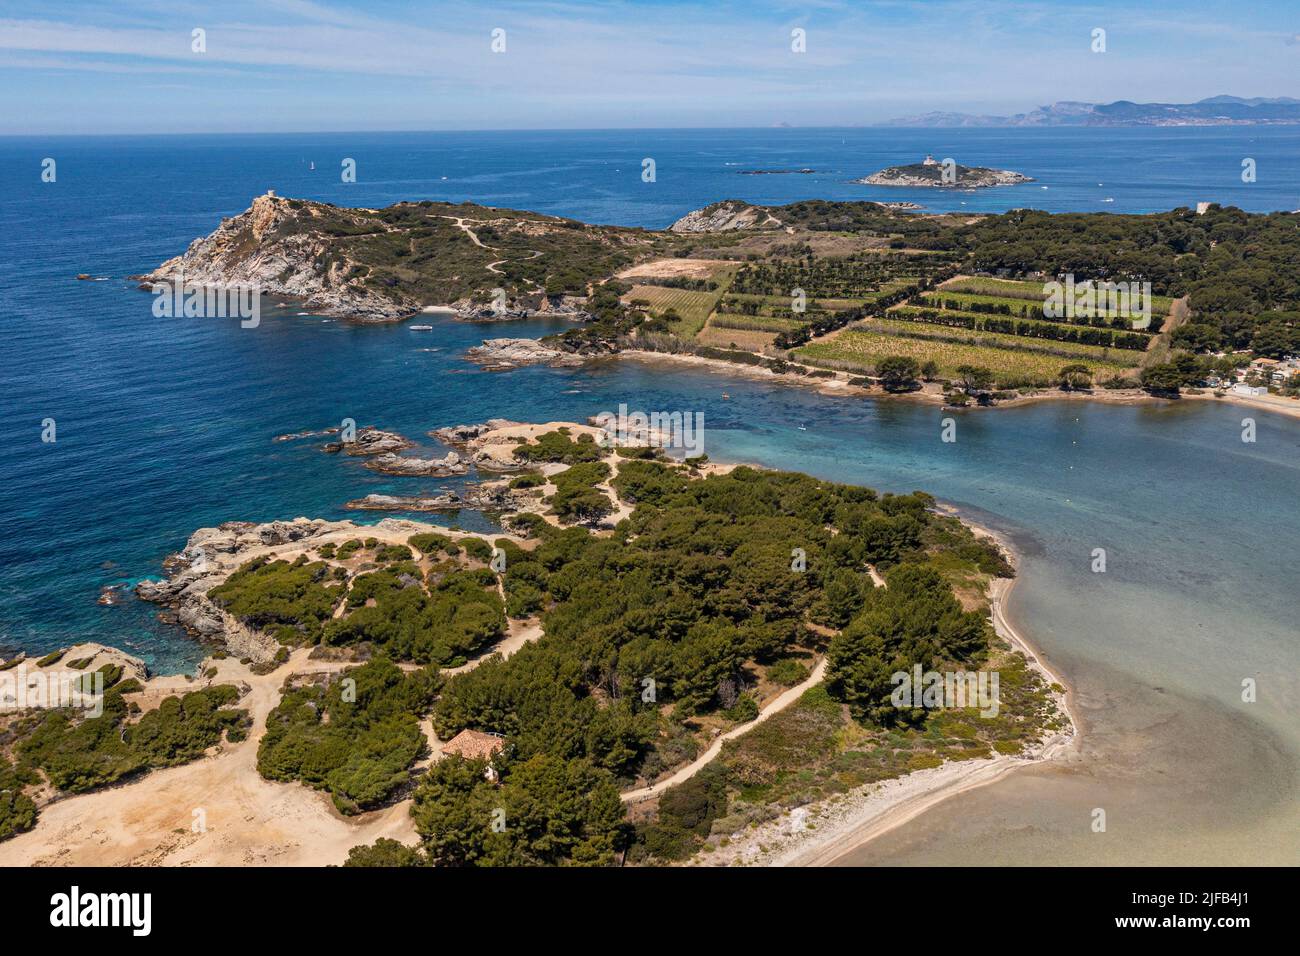 France, Var, Six Fours les Plages, Grand Gaou island in the foreground, the  Strait of Grand Gaou and Ile des Embiez then Grand Rouveau island in the  background (aerial view Stock Photo -